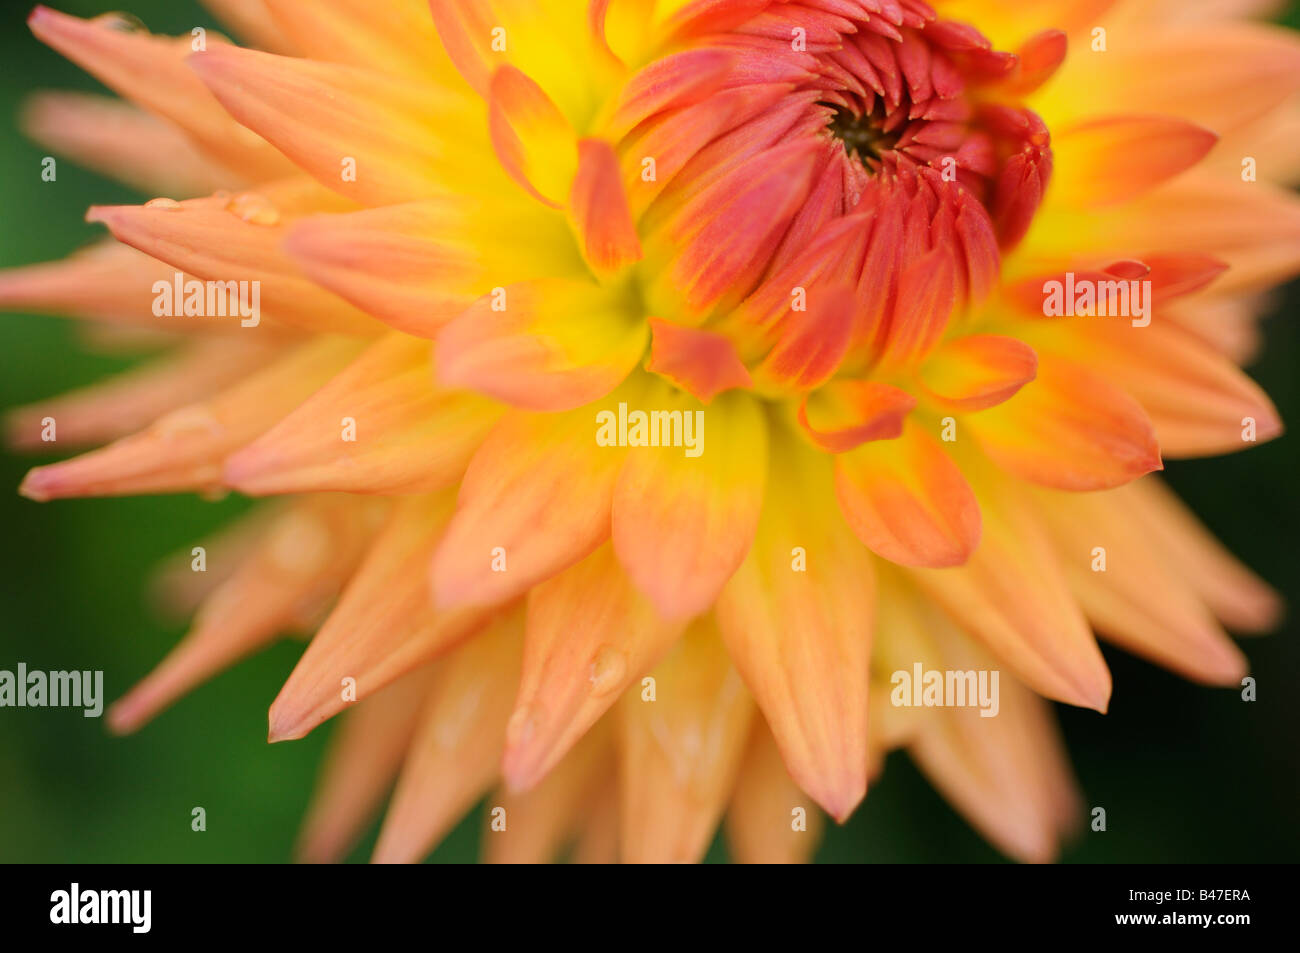 Dahlia cultivar abstract close up of petals with water droplets Stock Photo